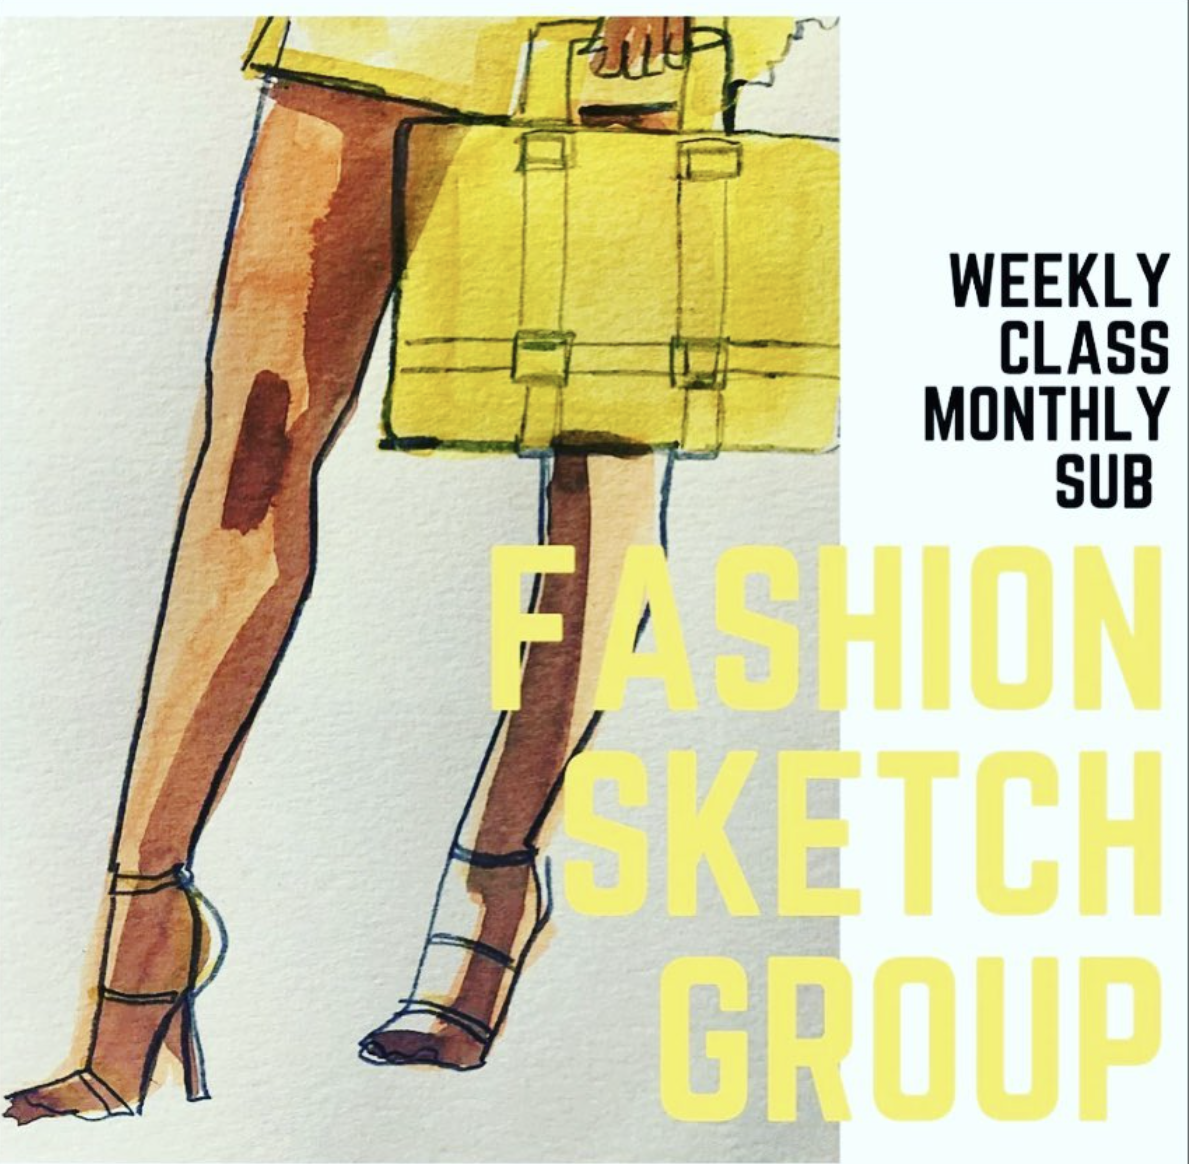 Fashion Sketch Group with Laura Volpintesta